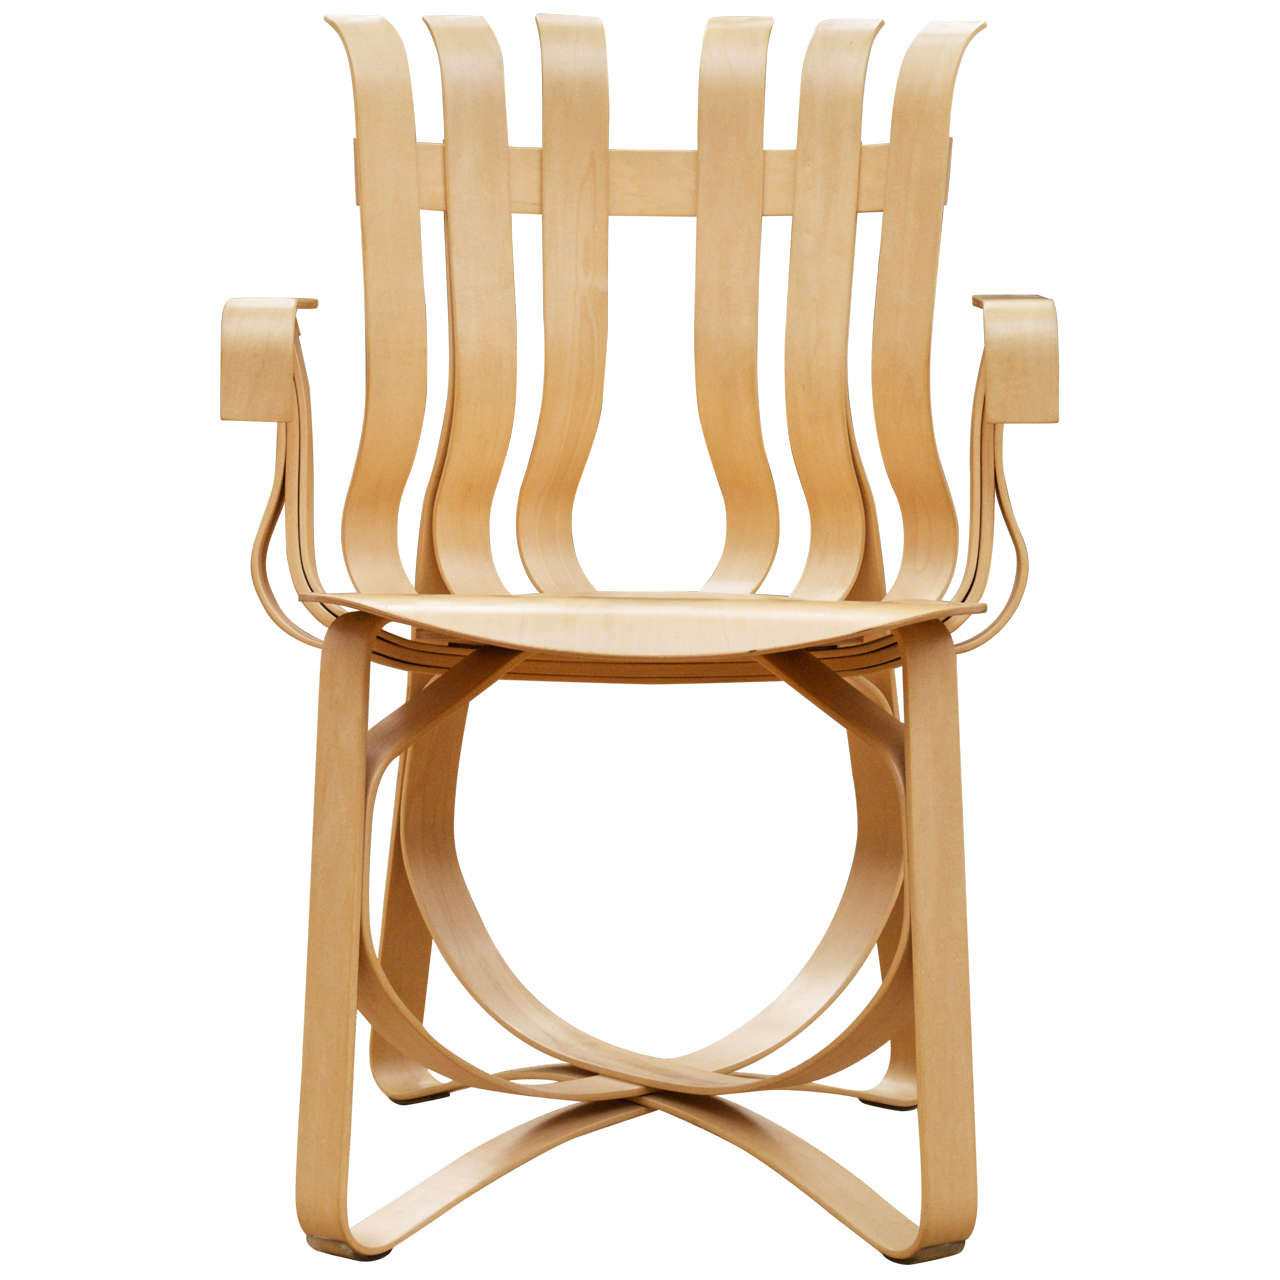 Frank Gehry Hat Trick arm chair for Knoll, 1998